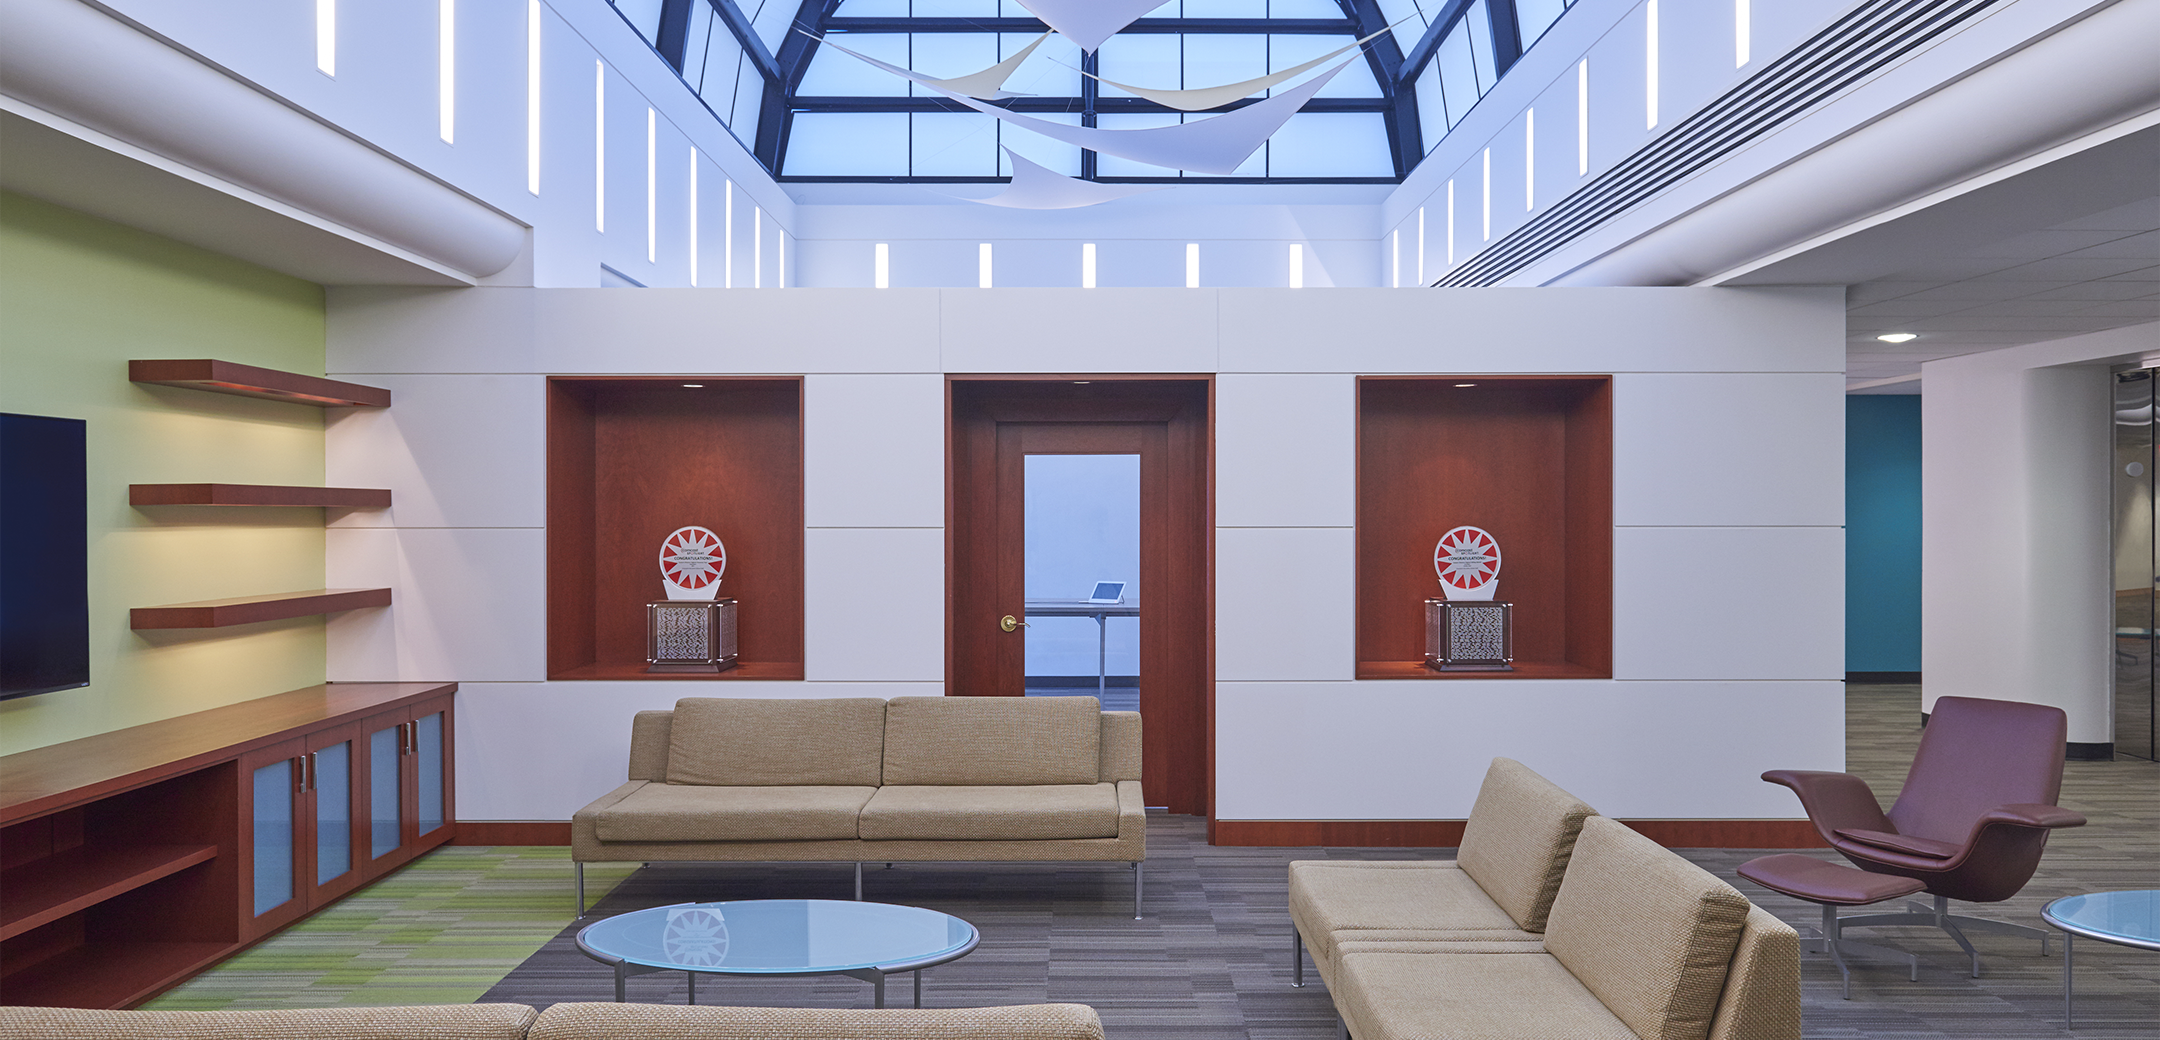 An empty sitting area in Comcast Communications Spotlight with shelving built into the back wall, a conference room, and a glass ceiling ceiling.